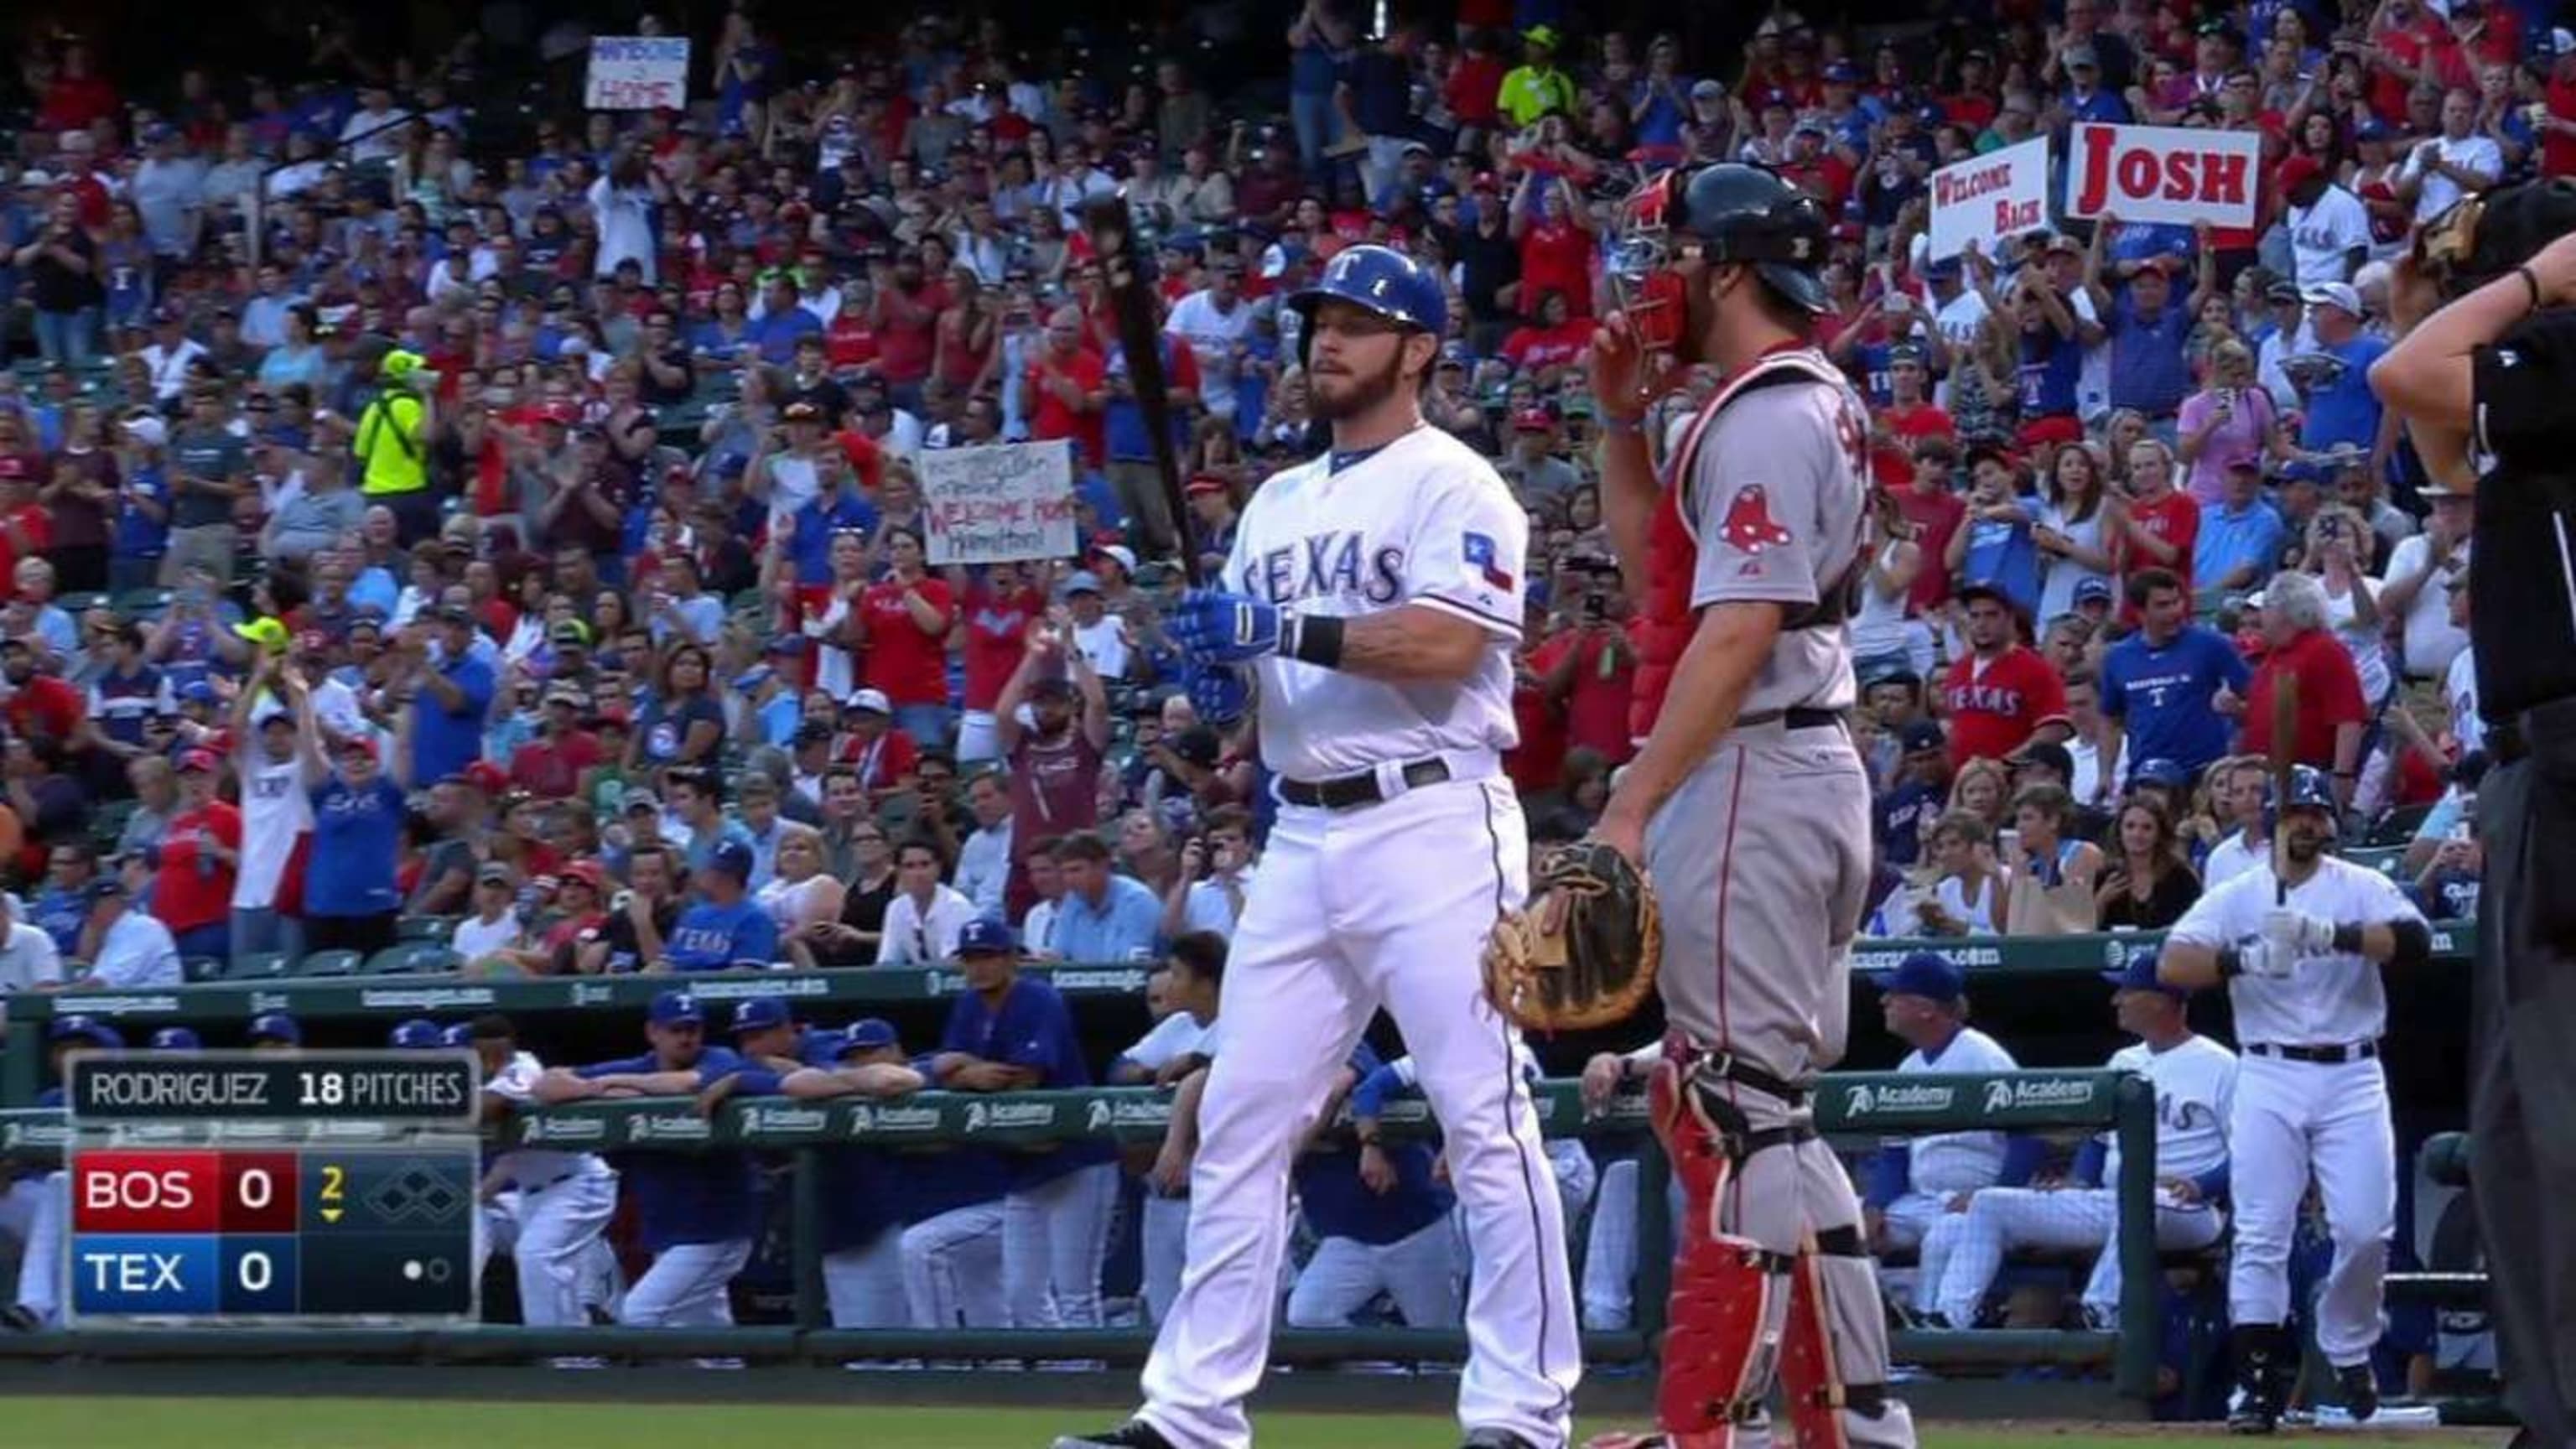 Why Josh Hamilton Will Never Be a Hall of Famer or Considered an